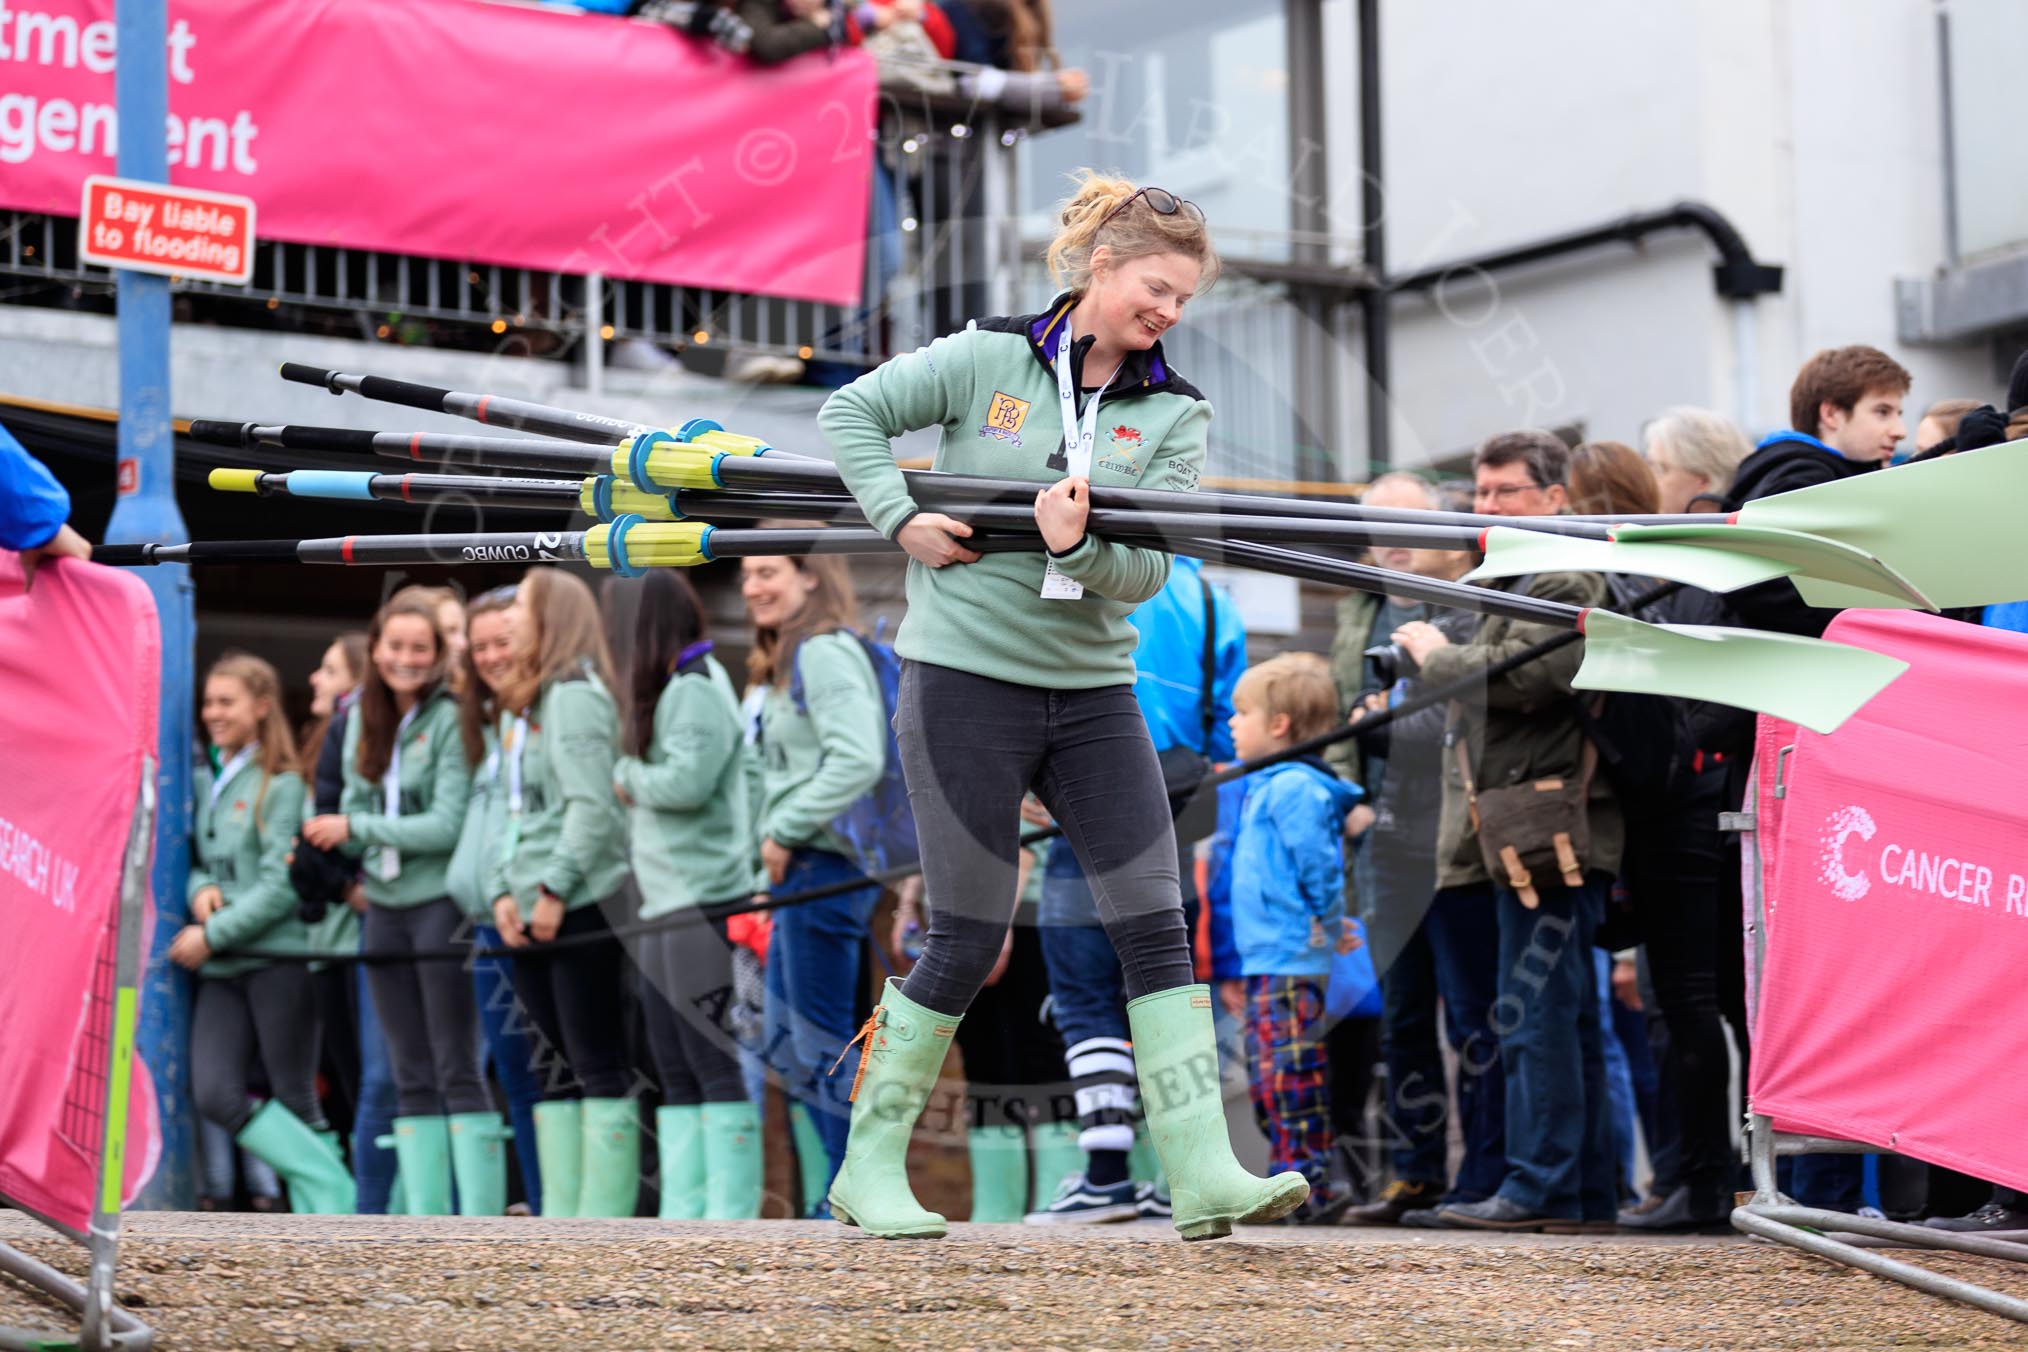 The Cancer Research UK Women's Boat Race 2018: The Cambridge women, as winners of the previous years race, are the first to come out of the boathouse.
River Thames between Putney Bridge and Mortlake,
London SW15,

United Kingdom,
on 24 March 2018 at 15:33, image #84